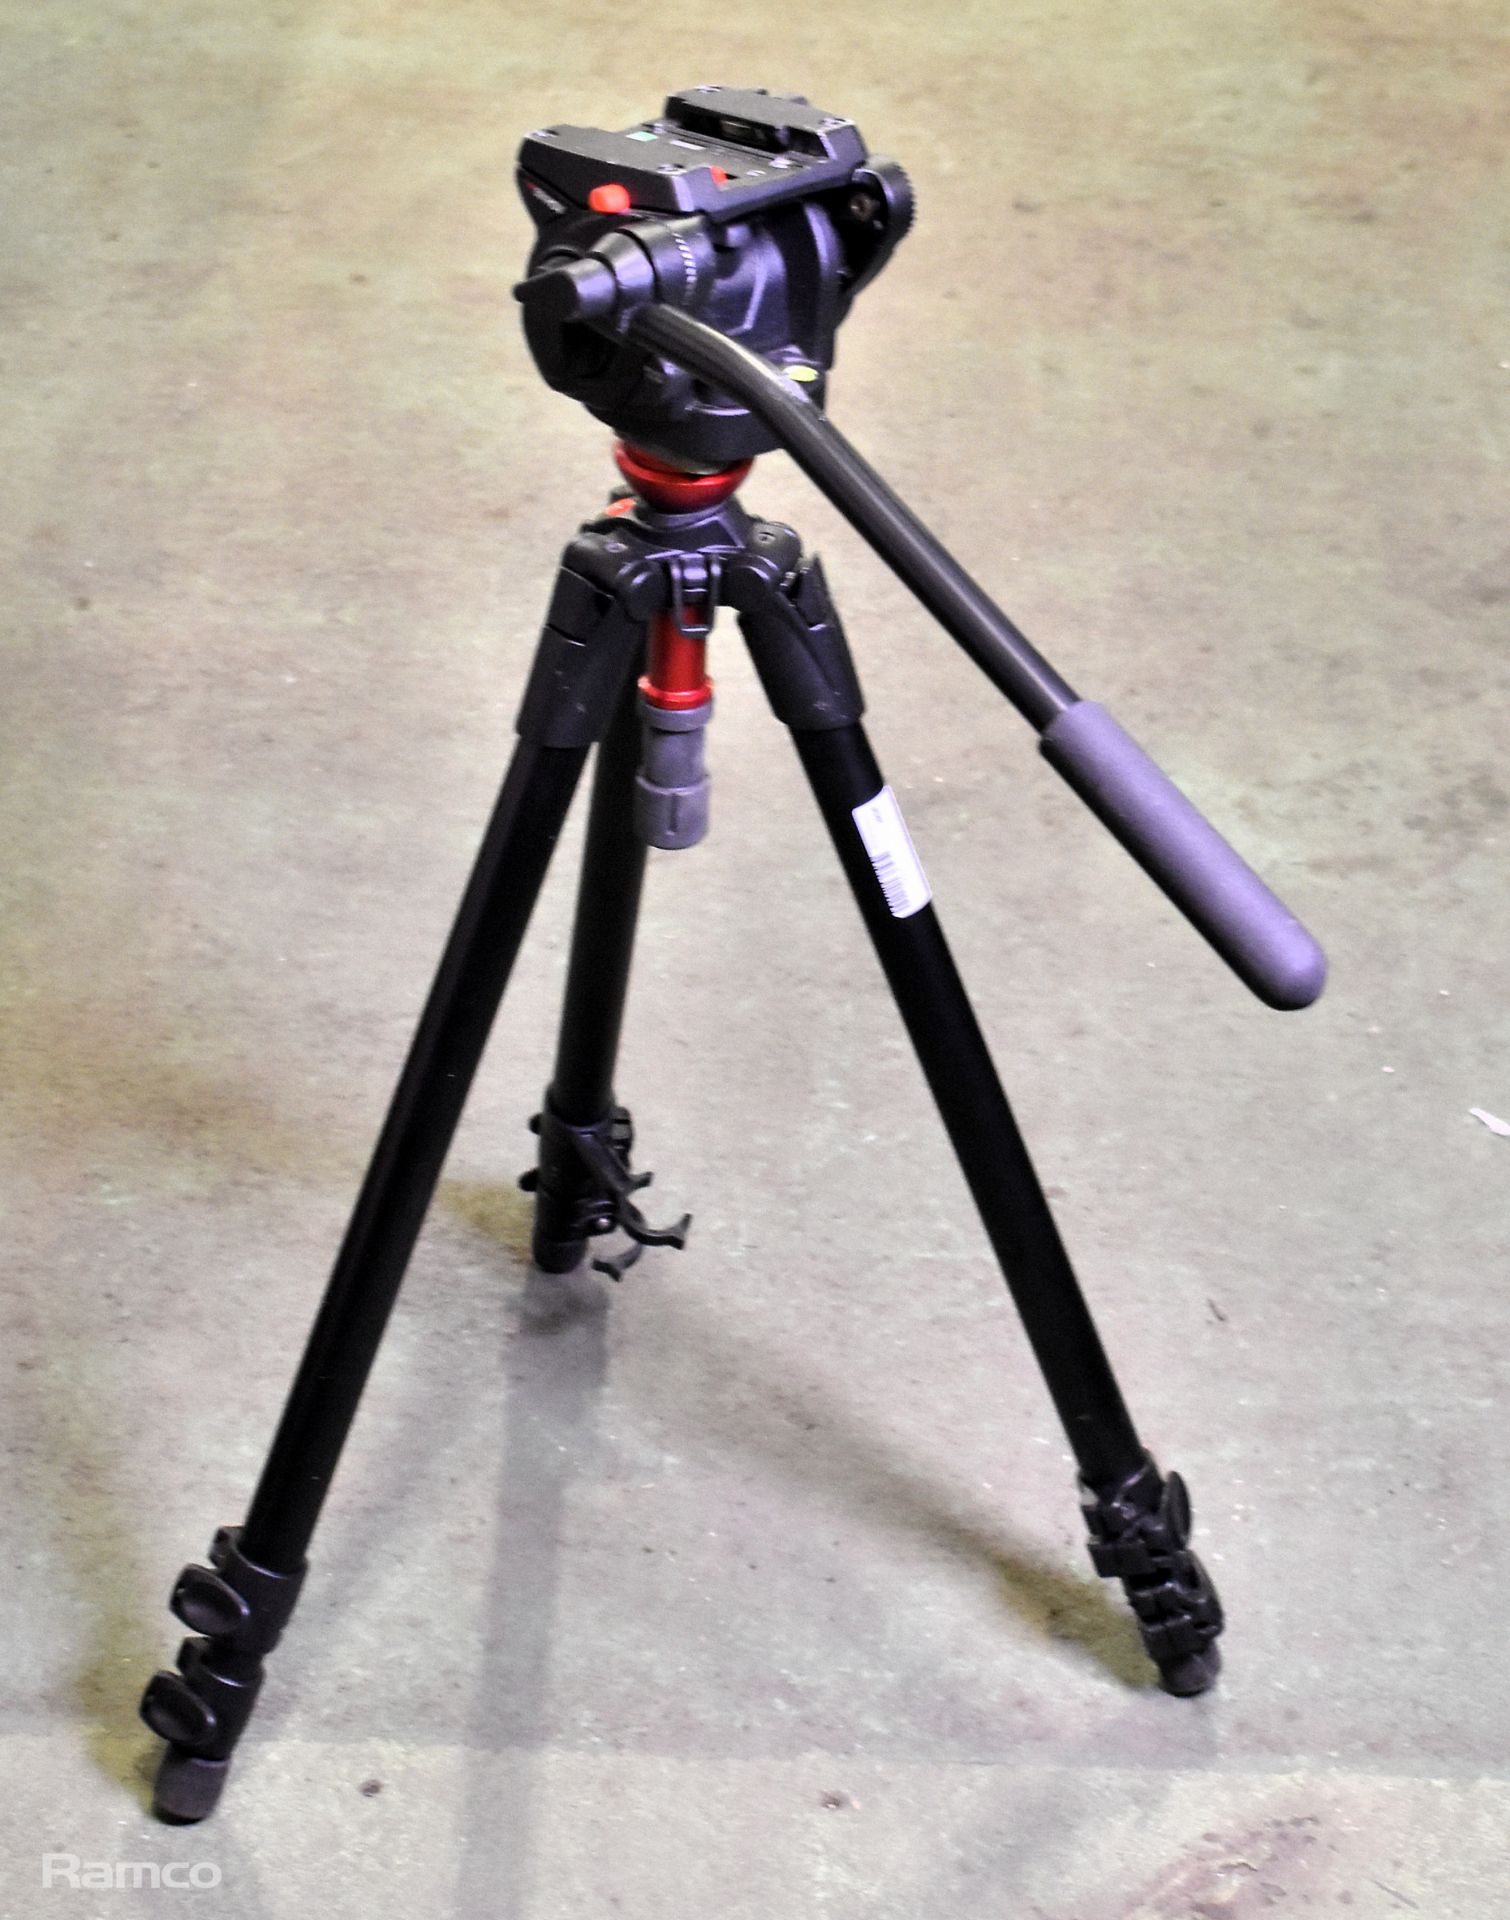 Manfrotto 501HDV head unit on a 745XB tripod with carry case - Image 2 of 8